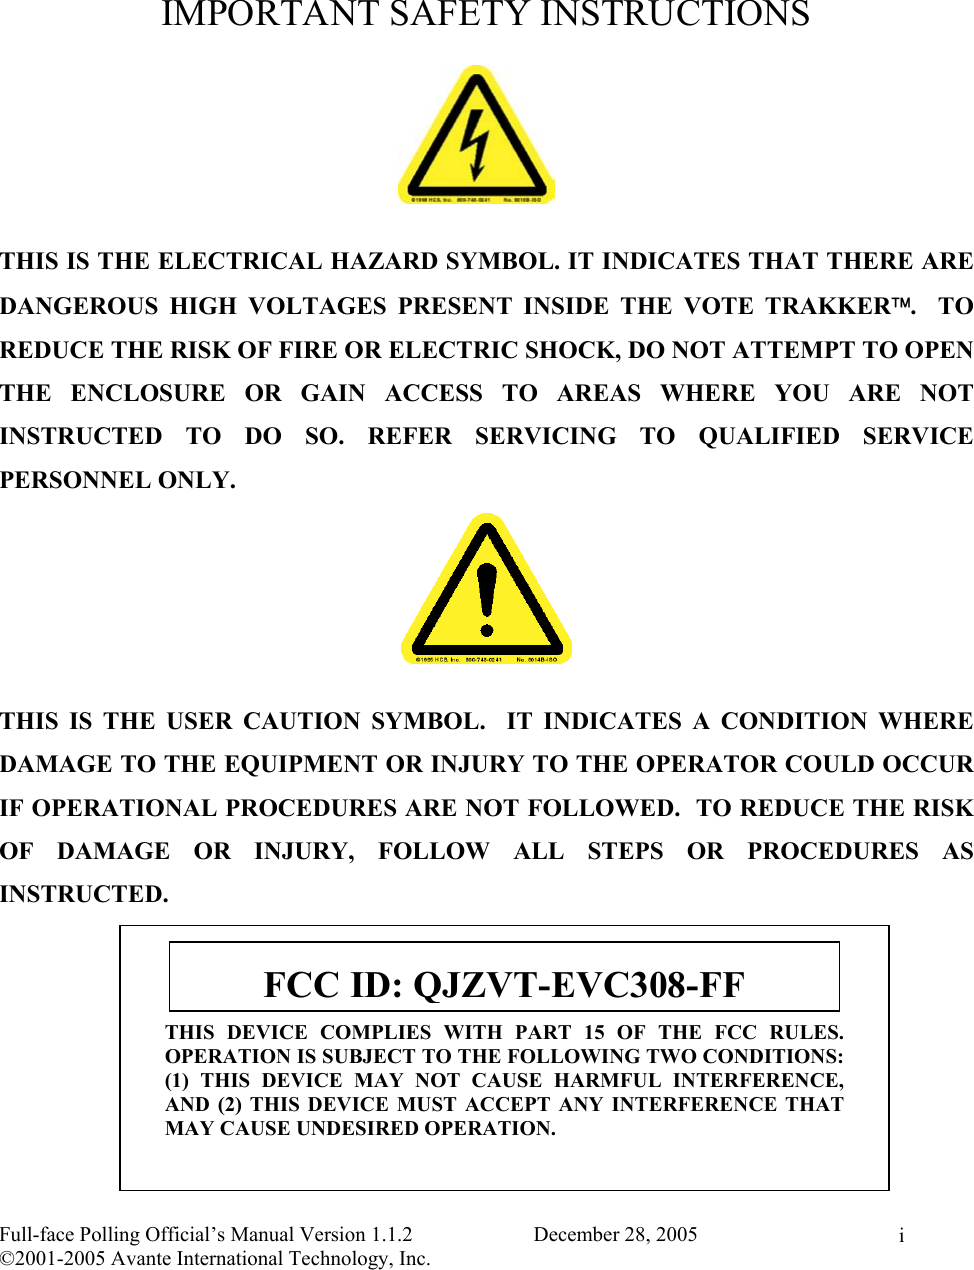    Full-face Polling Official’s Manual Version 1.1.2                       December 28, 2005 ©2001-2005 Avante International Technology, Inc.   i IMPORTANT SAFETY INSTRUCTIONS  THIS IS THE ELECTRICAL HAZARD SYMBOL. IT INDICATES THAT THERE ARE DANGEROUS HIGH VOLTAGES PRESENT INSIDE THE VOTE TRAKKER.  TO REDUCE THE RISK OF FIRE OR ELECTRIC SHOCK, DO NOT ATTEMPT TO OPEN THE ENCLOSURE OR GAIN ACCESS TO AREAS WHERE YOU ARE NOT INSTRUCTED TO DO SO. REFER SERVICING TO QUALIFIED SERVICE PERSONNEL ONLY.  THIS IS THE USER CAUTION SYMBOL.  IT INDICATES A CONDITION WHERE DAMAGE TO THE EQUIPMENT OR INJURY TO THE OPERATOR COULD OCCUR IF OPERATIONAL PROCEDURES ARE NOT FOLLOWED.  TO REDUCE THE RISK OF DAMAGE OR INJURY, FOLLOW ALL STEPS OR PROCEDURES AS INSTRUCTED. THIS DEVICE COMPLIES WITH PART 15 OF THE FCC RULES.OPERATION IS SUBJECT TO THE FOLLOWING TWO CONDITIONS:(1) THIS DEVICE MAY NOT CAUSE HARMFUL INTERFERENCE,AND (2) THIS DEVICE MUST ACCEPT ANY INTERFERENCE THATMAY CAUSE UNDESIRED OPERATION. FCC ID: QJZVT-EVC308-FF 